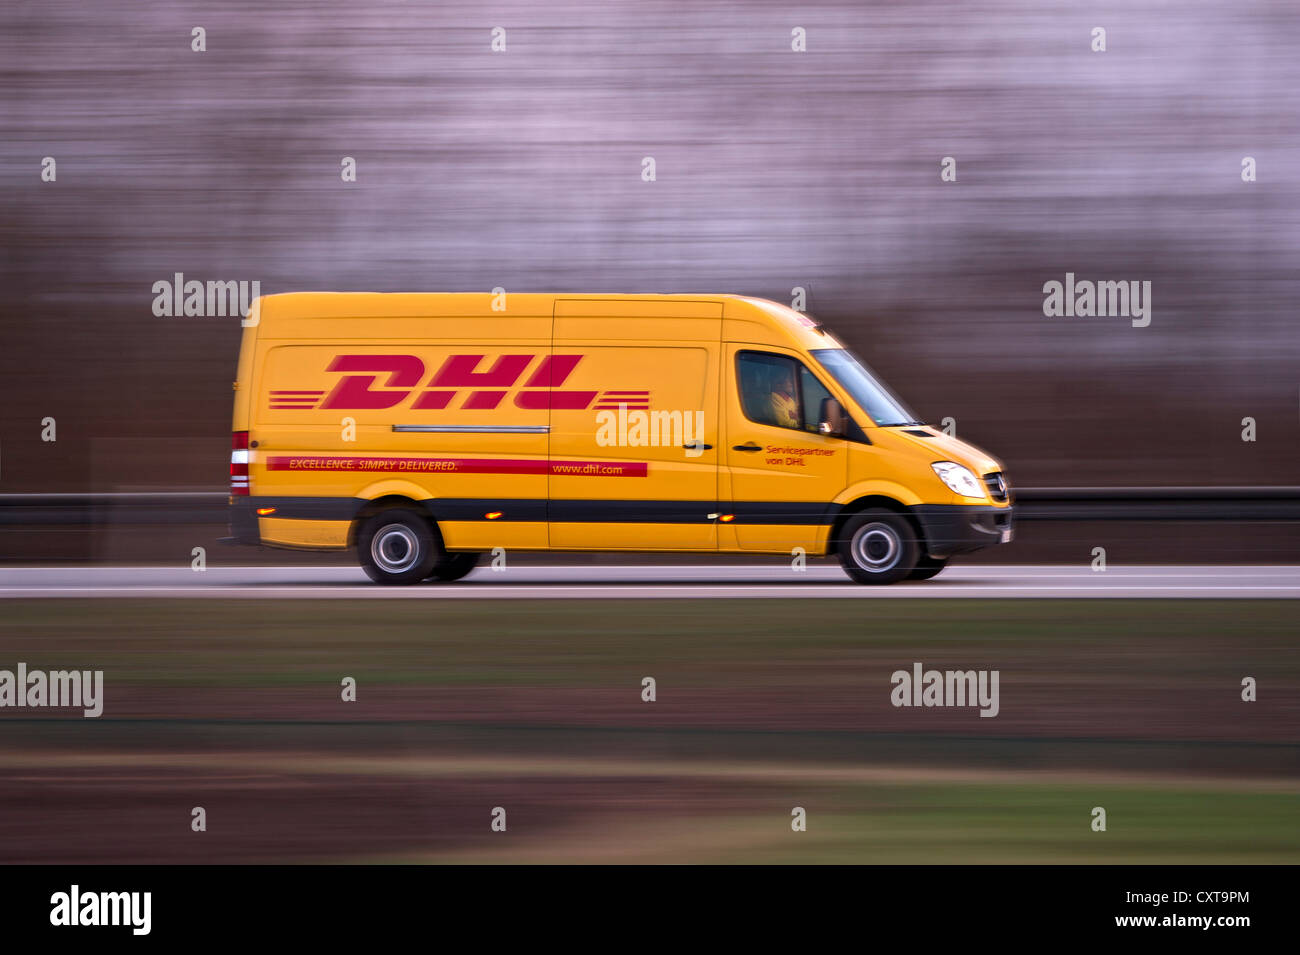 Download Dhl Delivery Driver Wallpaper | Wallpapers.com